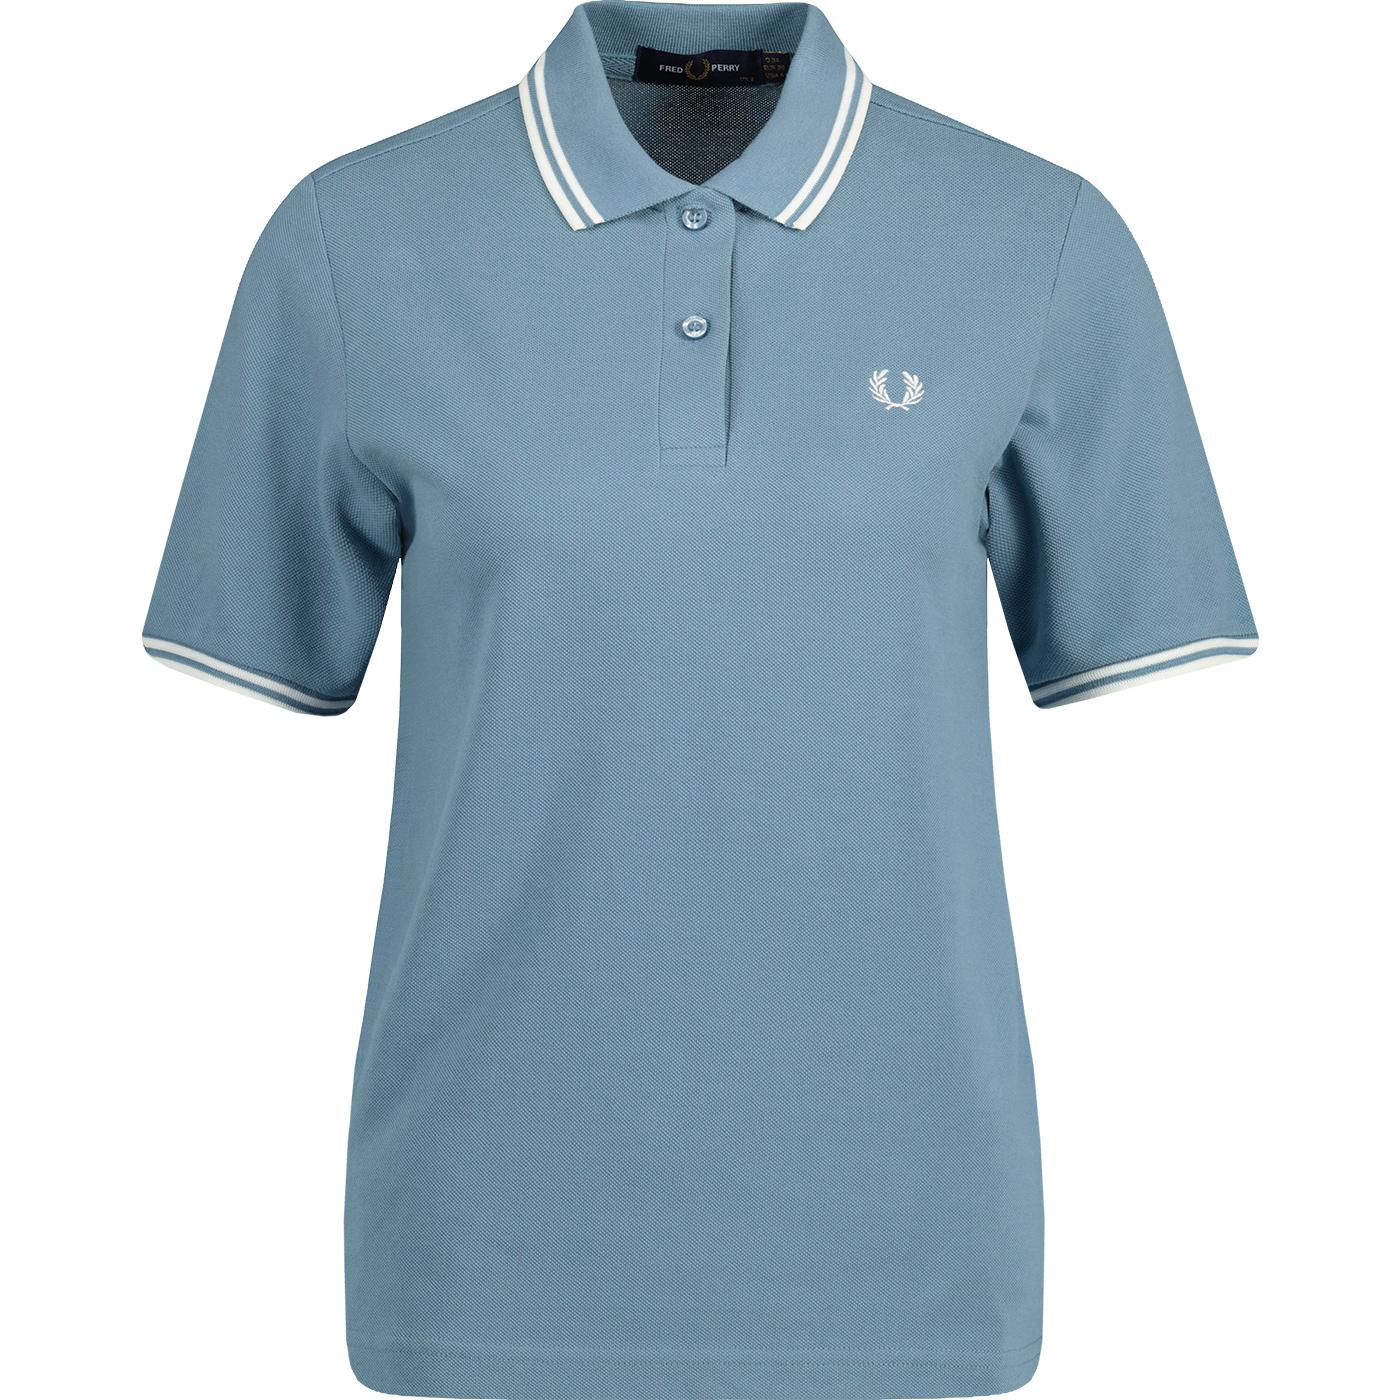 FRED PERRY Womens G3600 Retro Twin Tipped Polo AB